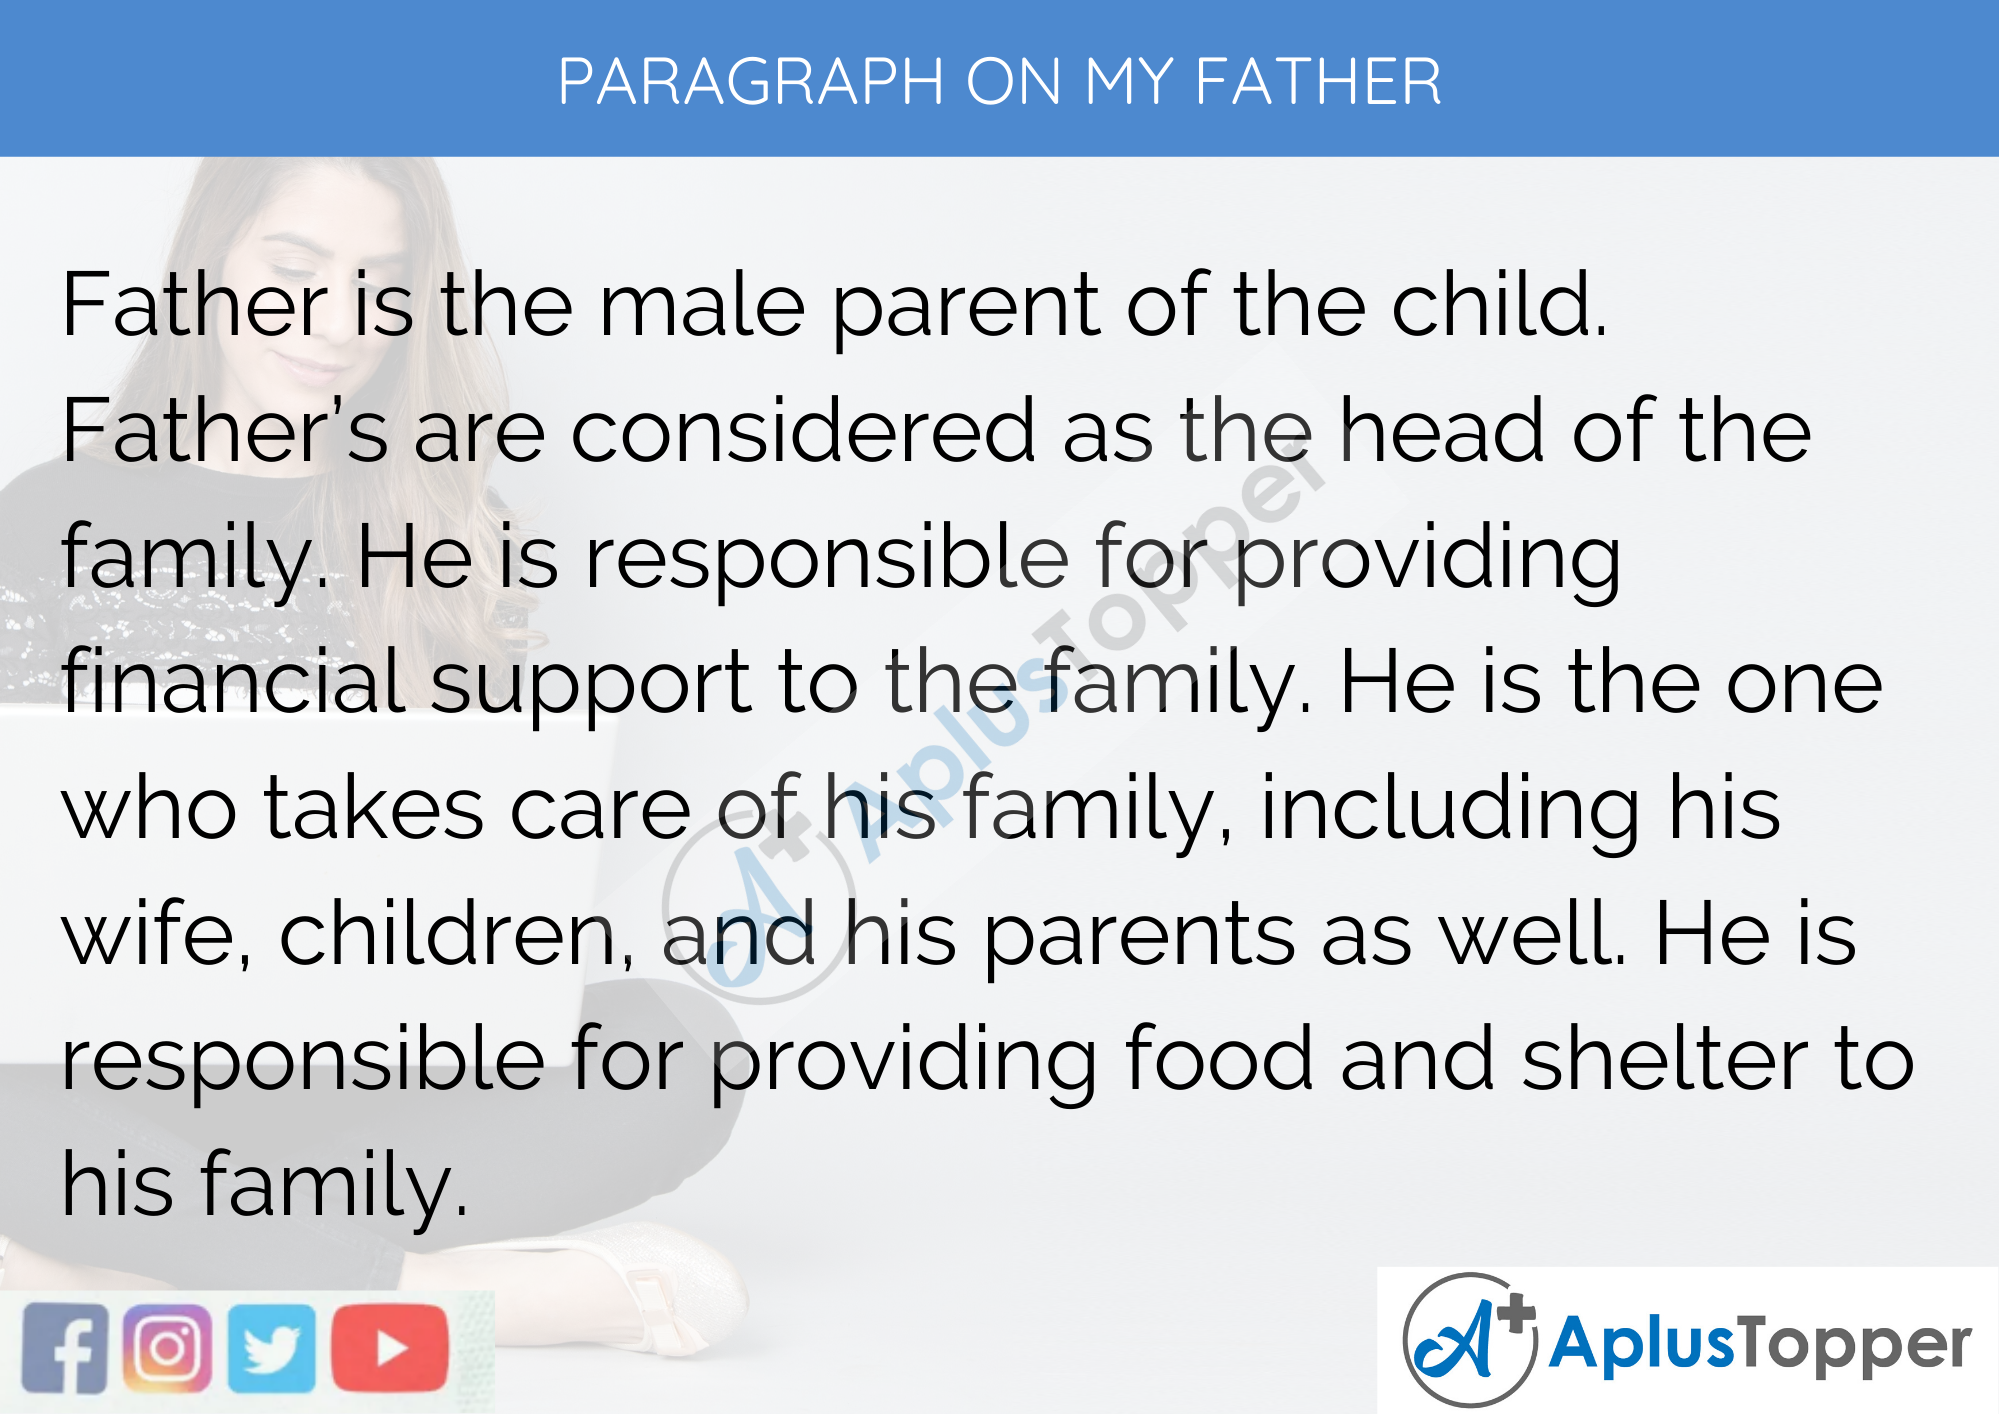 father's role in the family essay